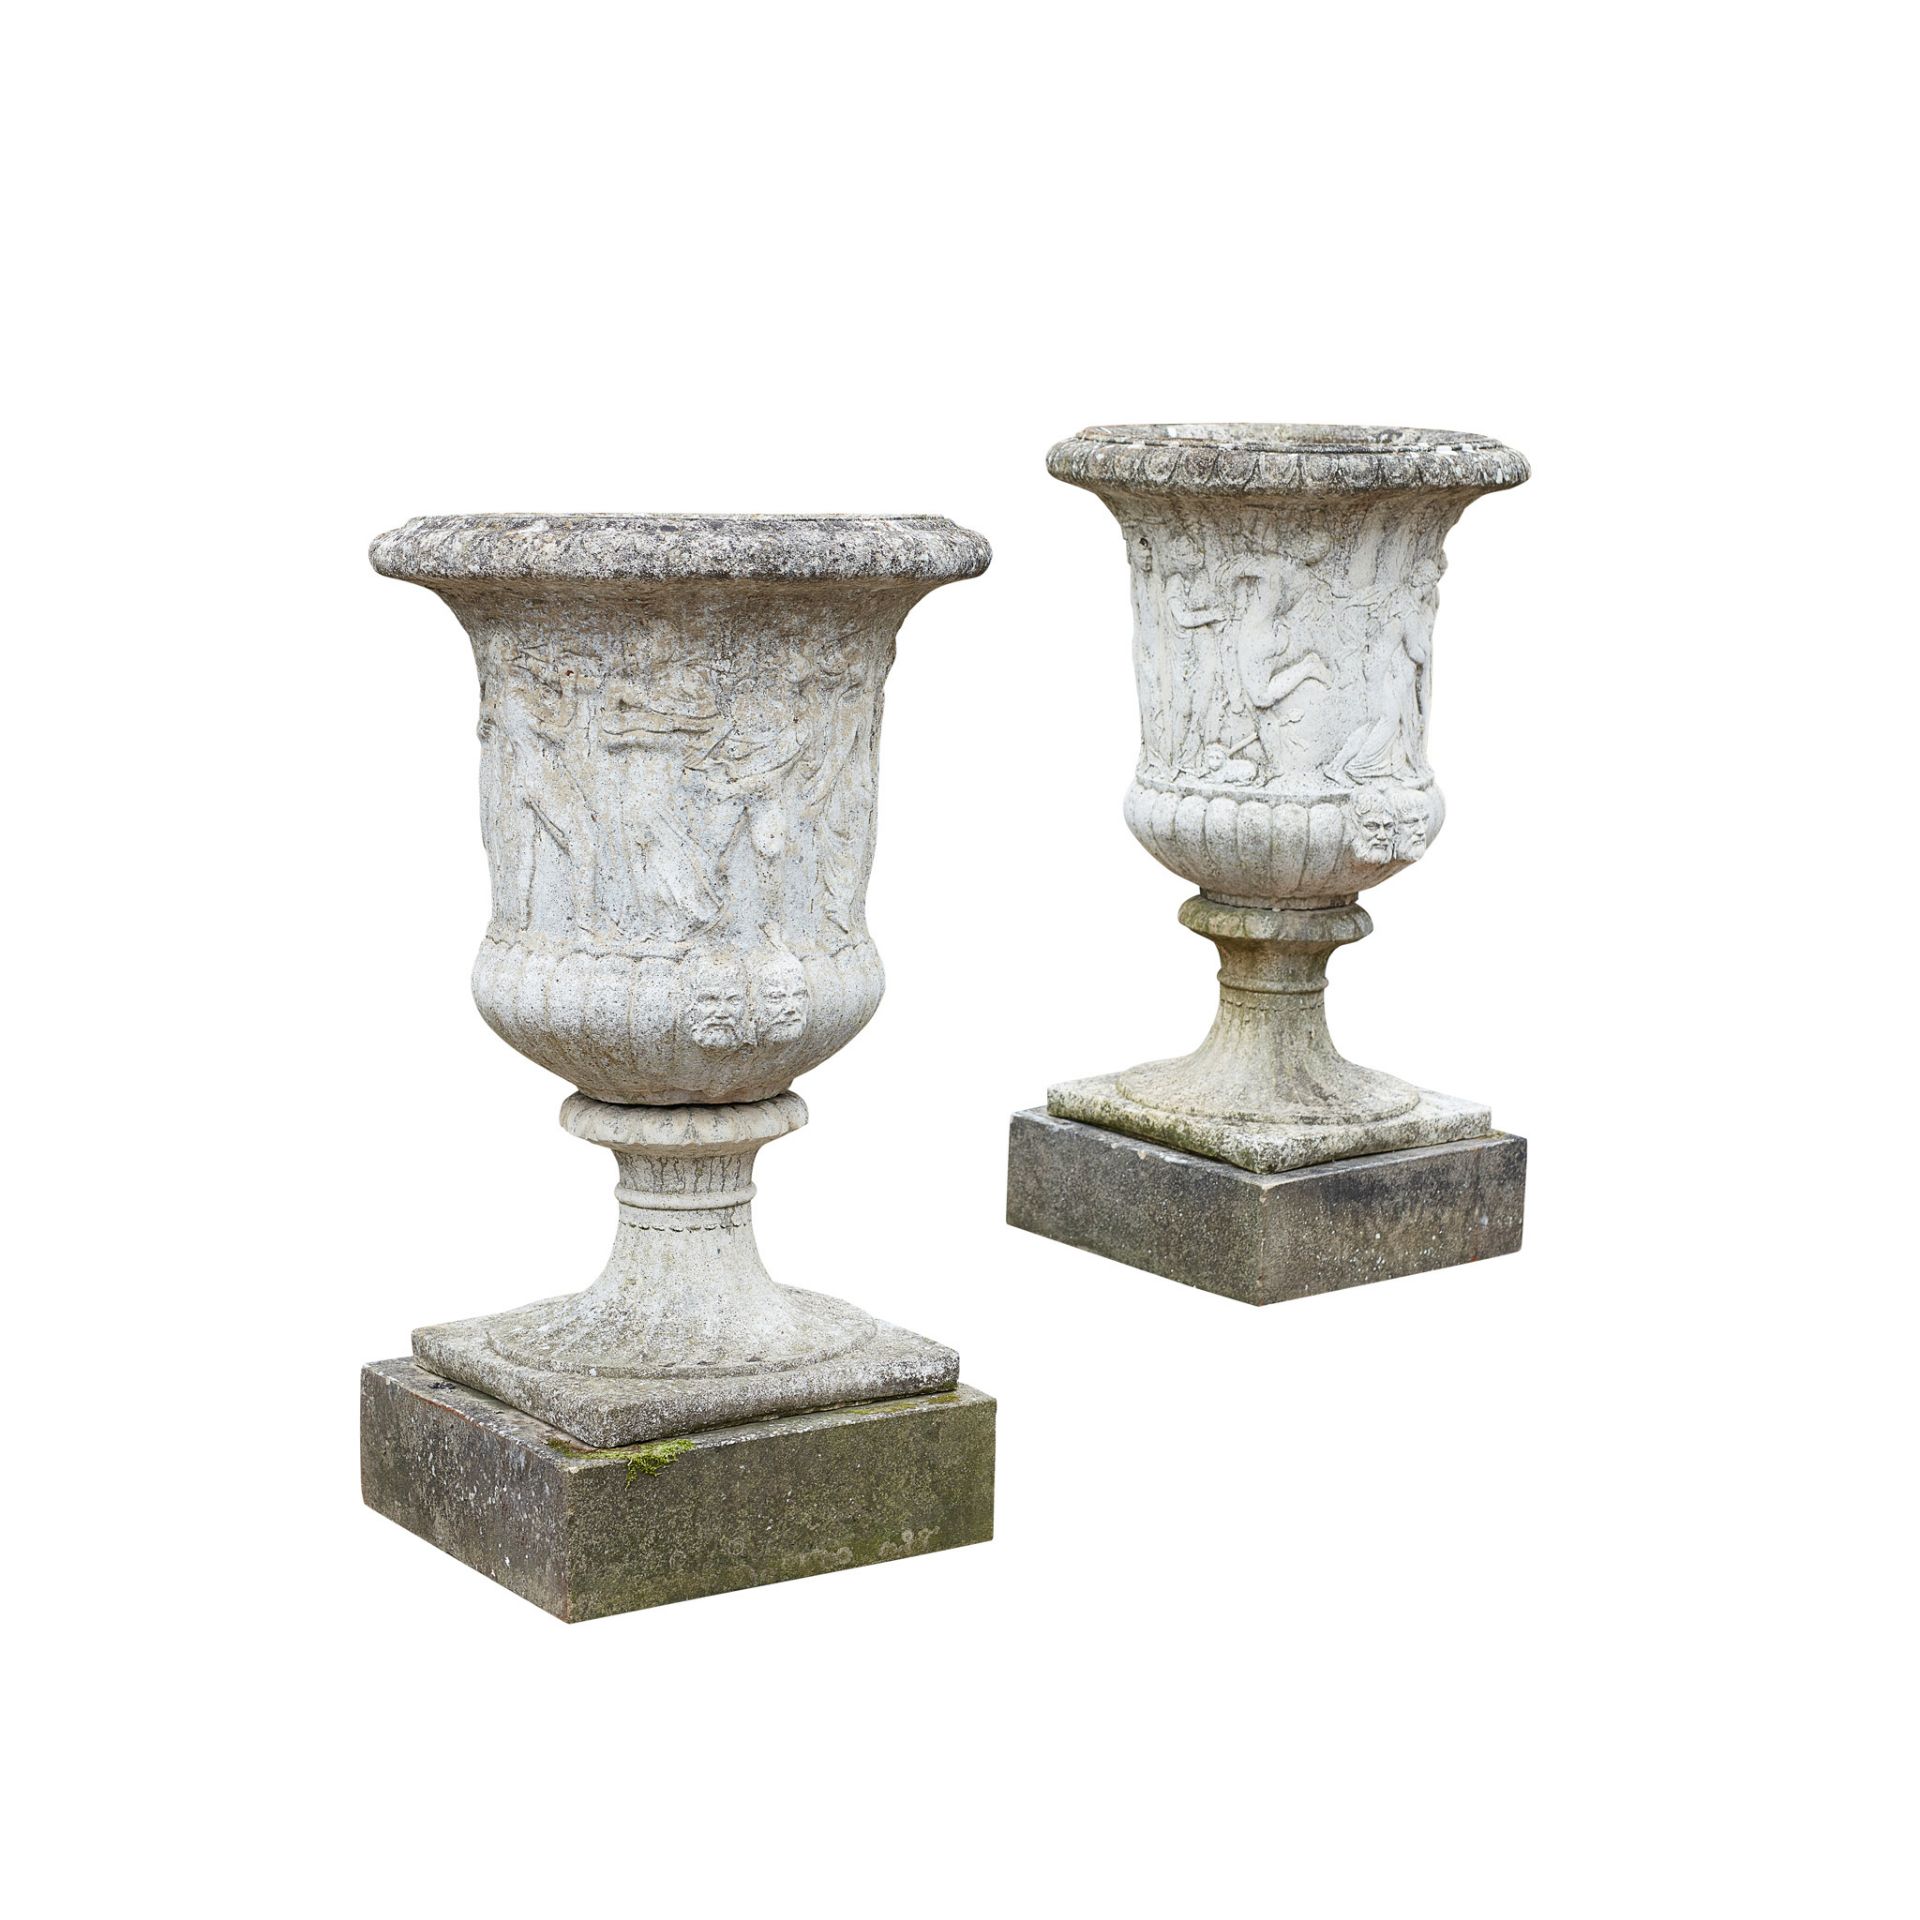 PAIR OF WHITE PAINTED COMPOSITION STONE RELIEF MOULDED URNS AND STANDS 20TH CENTURY